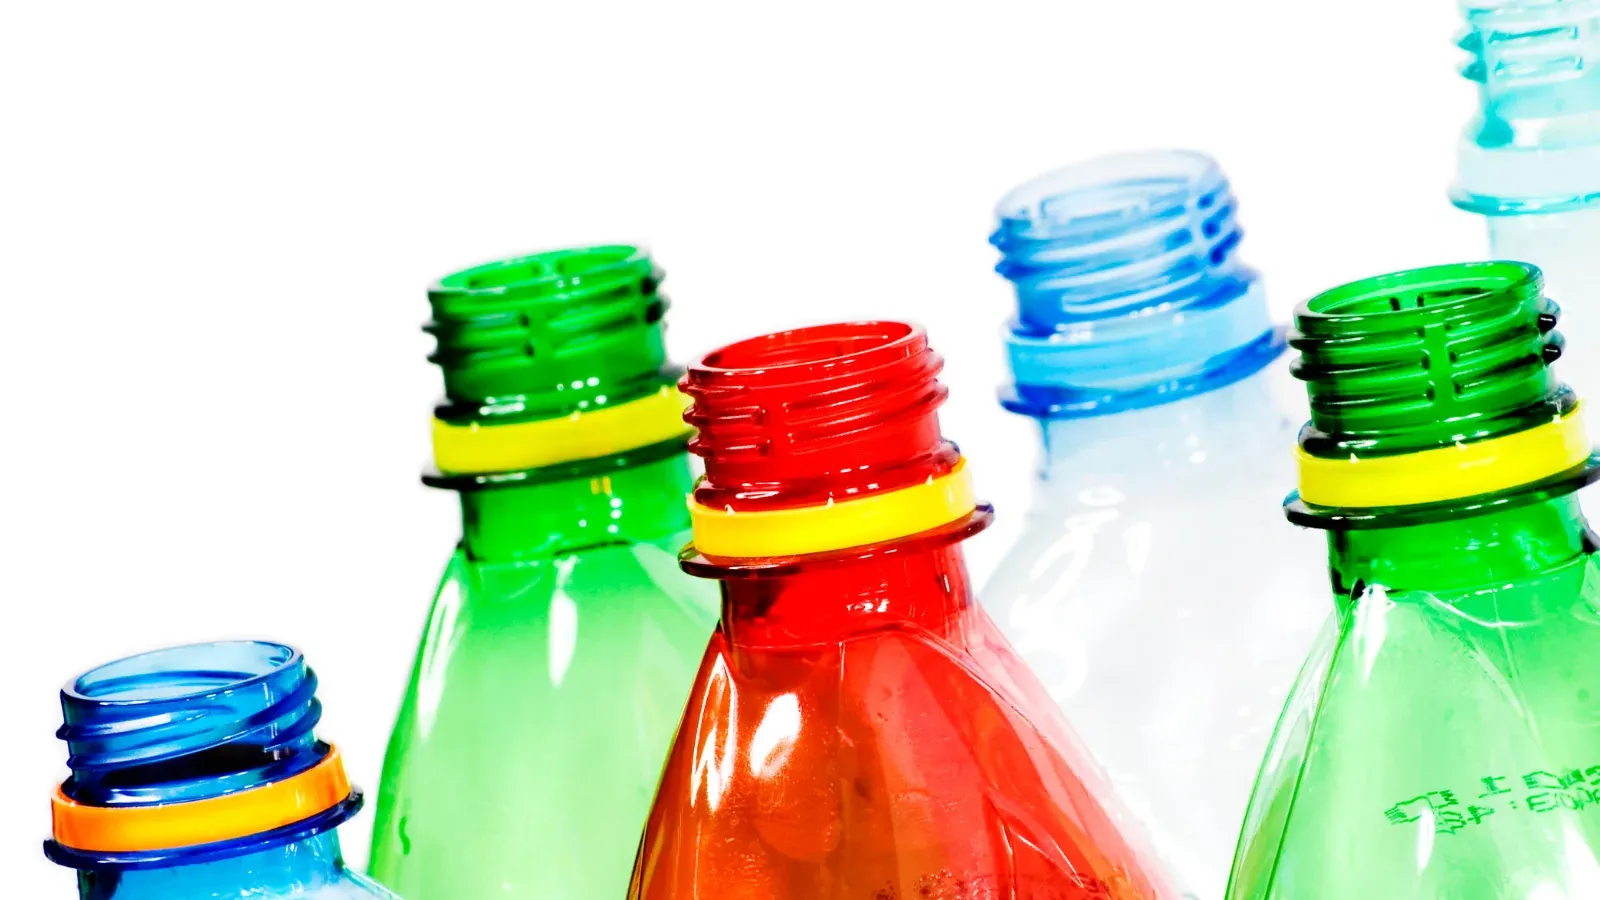 Can Birch Biosciences Revolutionize Plastic Recycling with Engineered Enzymes?